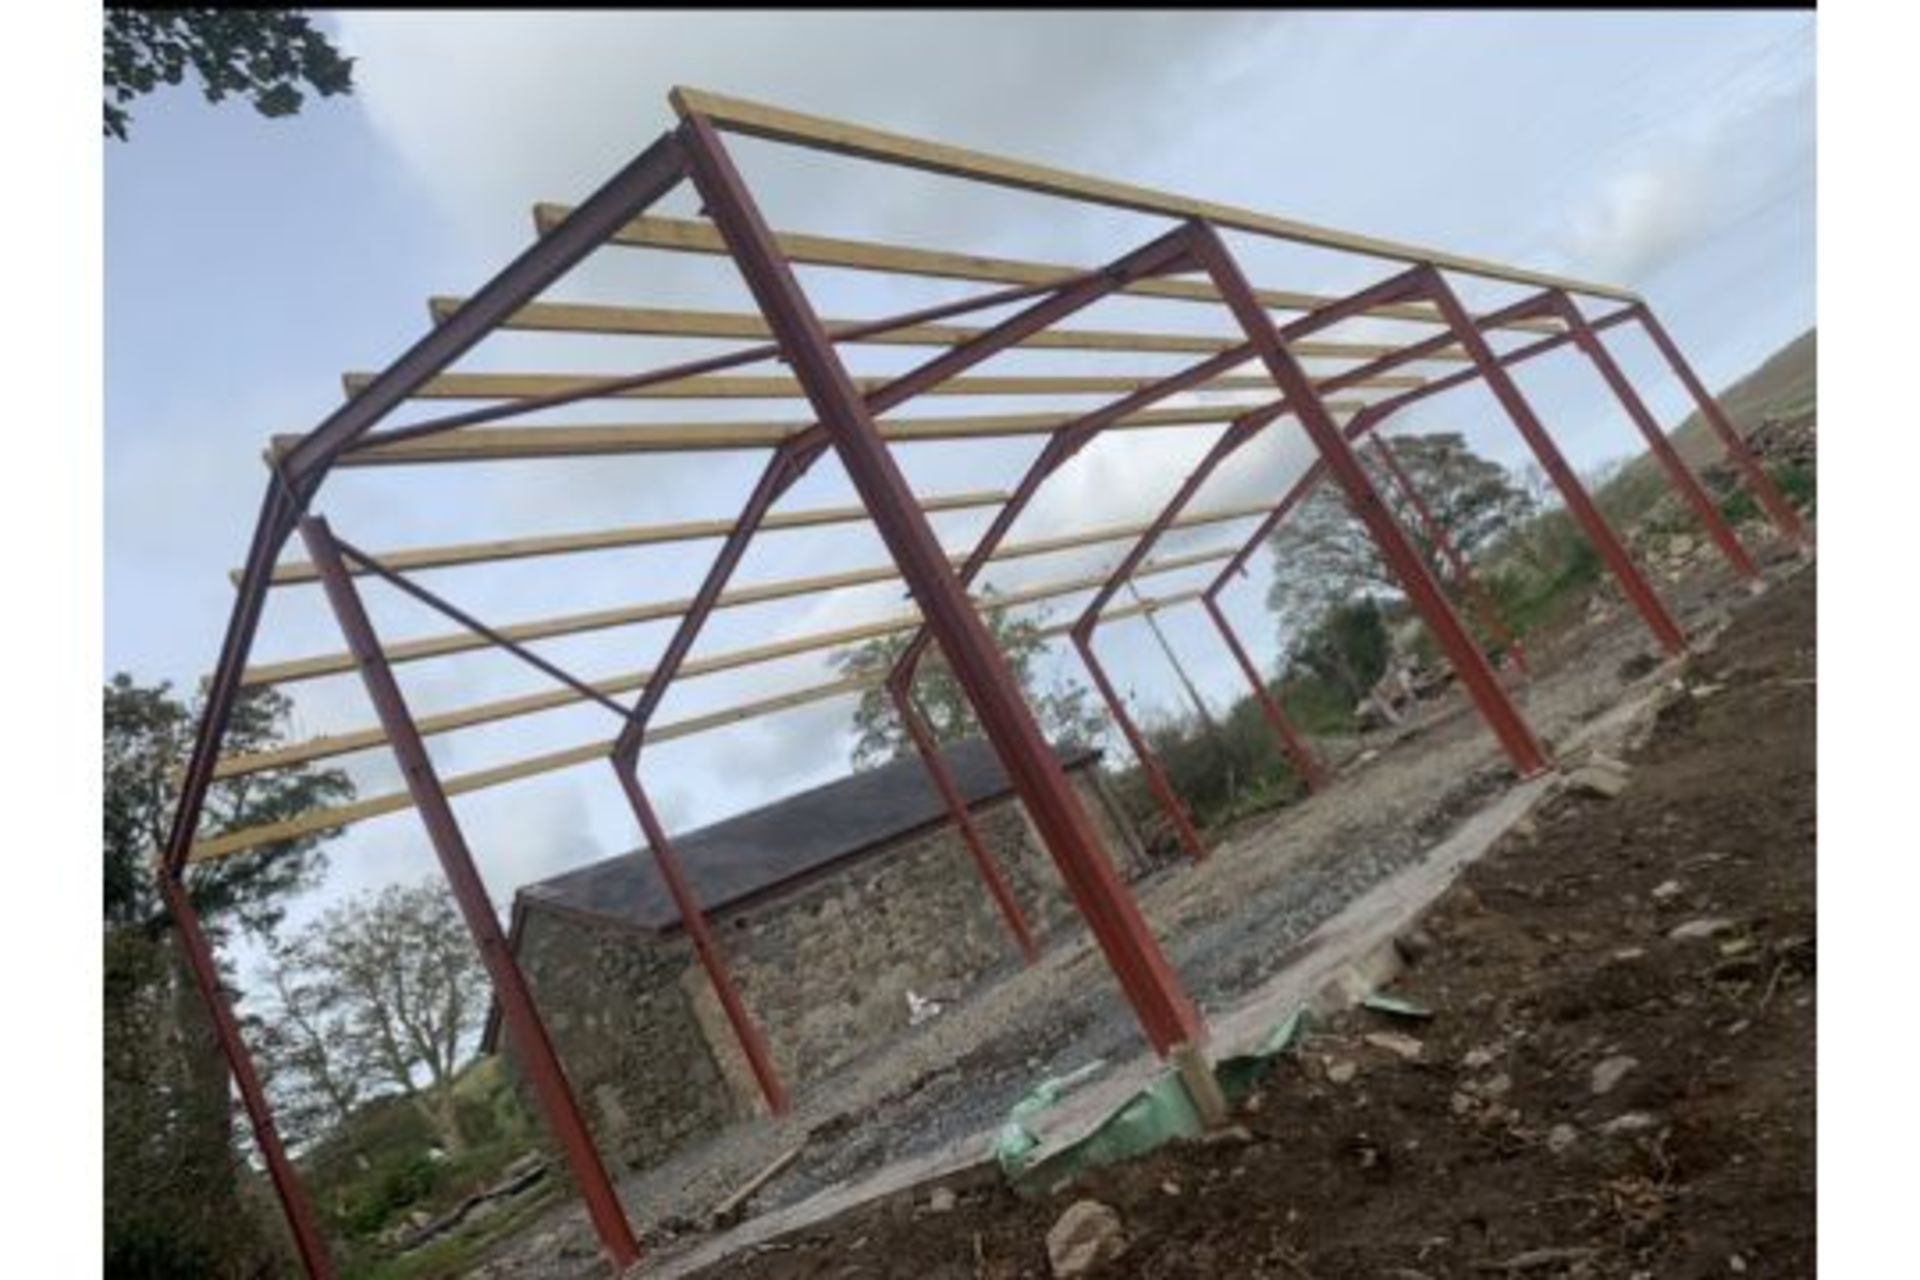 47 X 30 X 16 STEEL SHED FRAME BRAND NEW